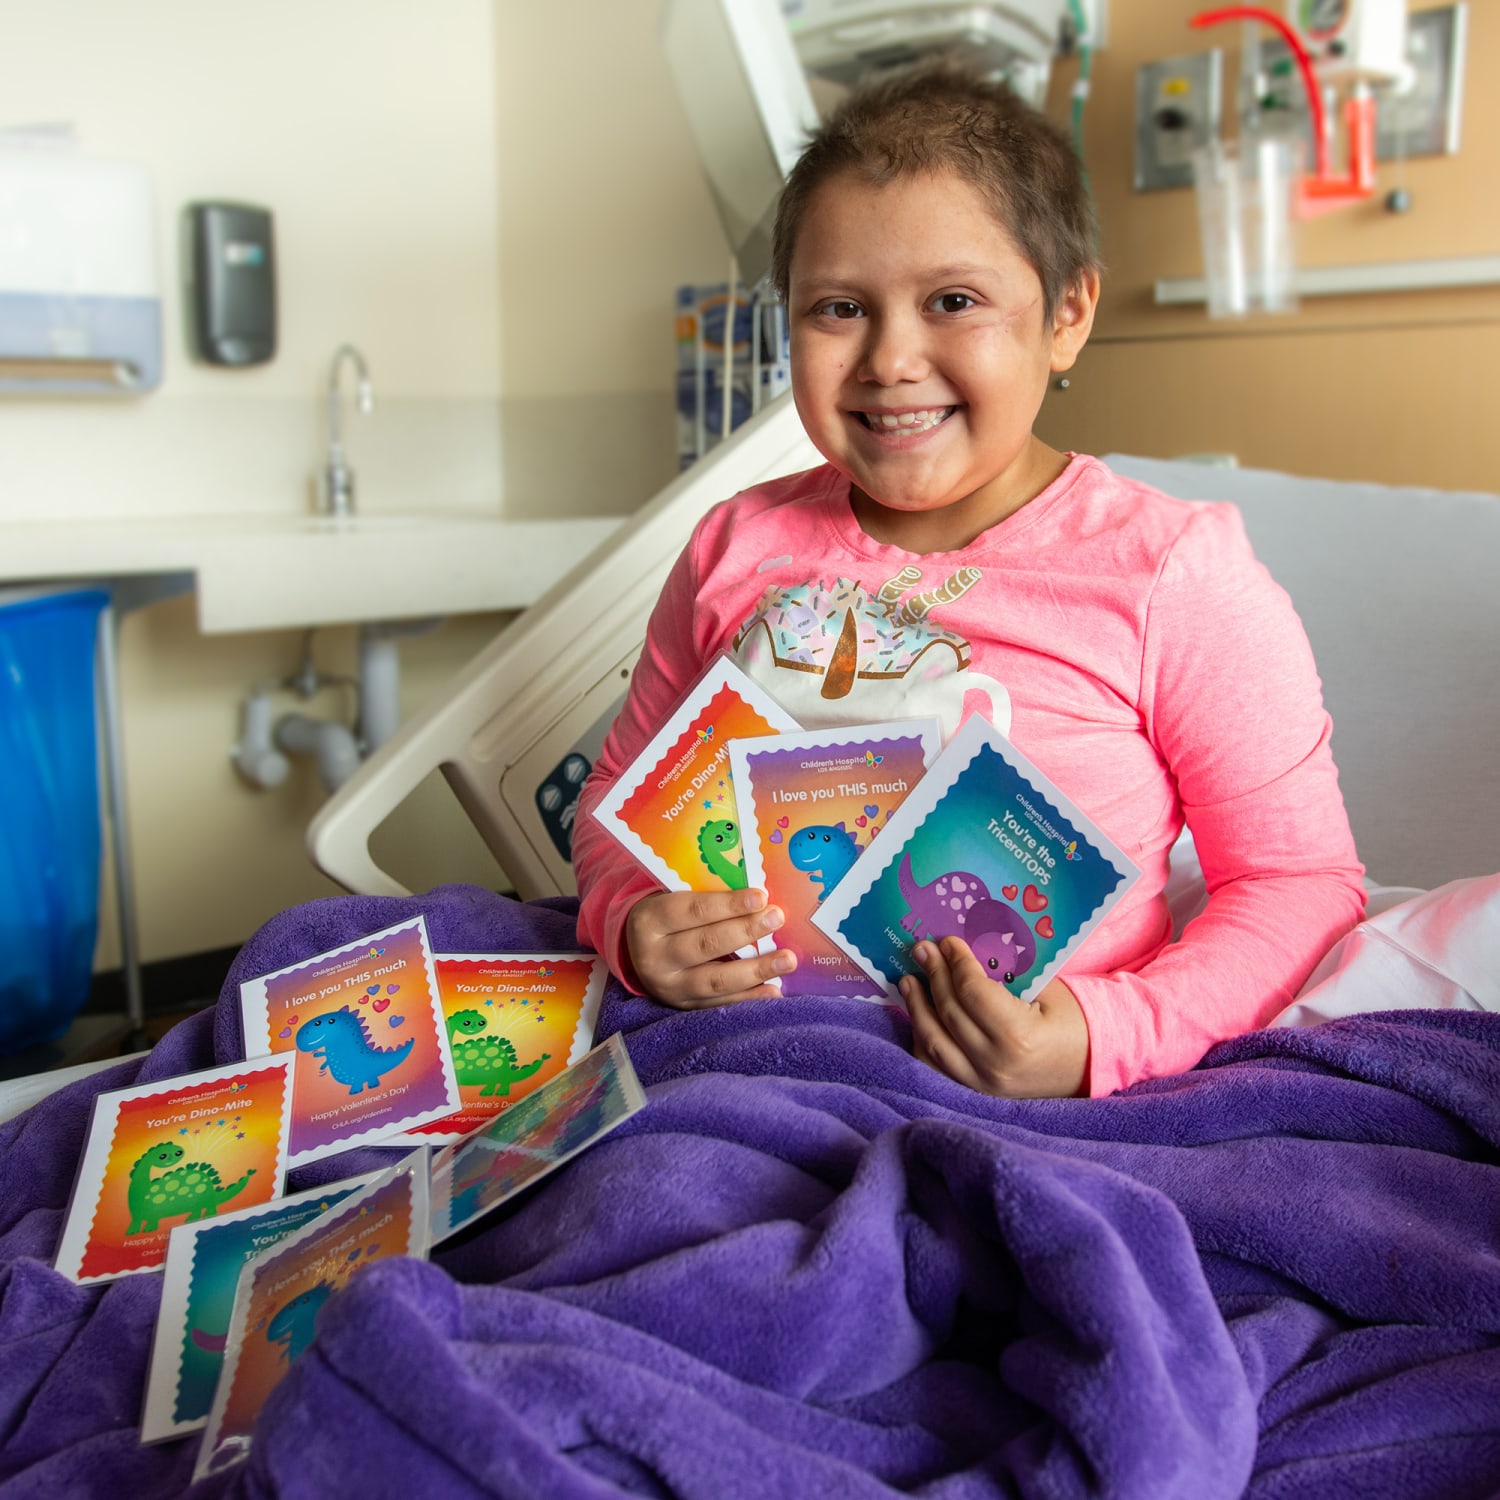 Children's Hospital patients send get-well cards to friend, Padres